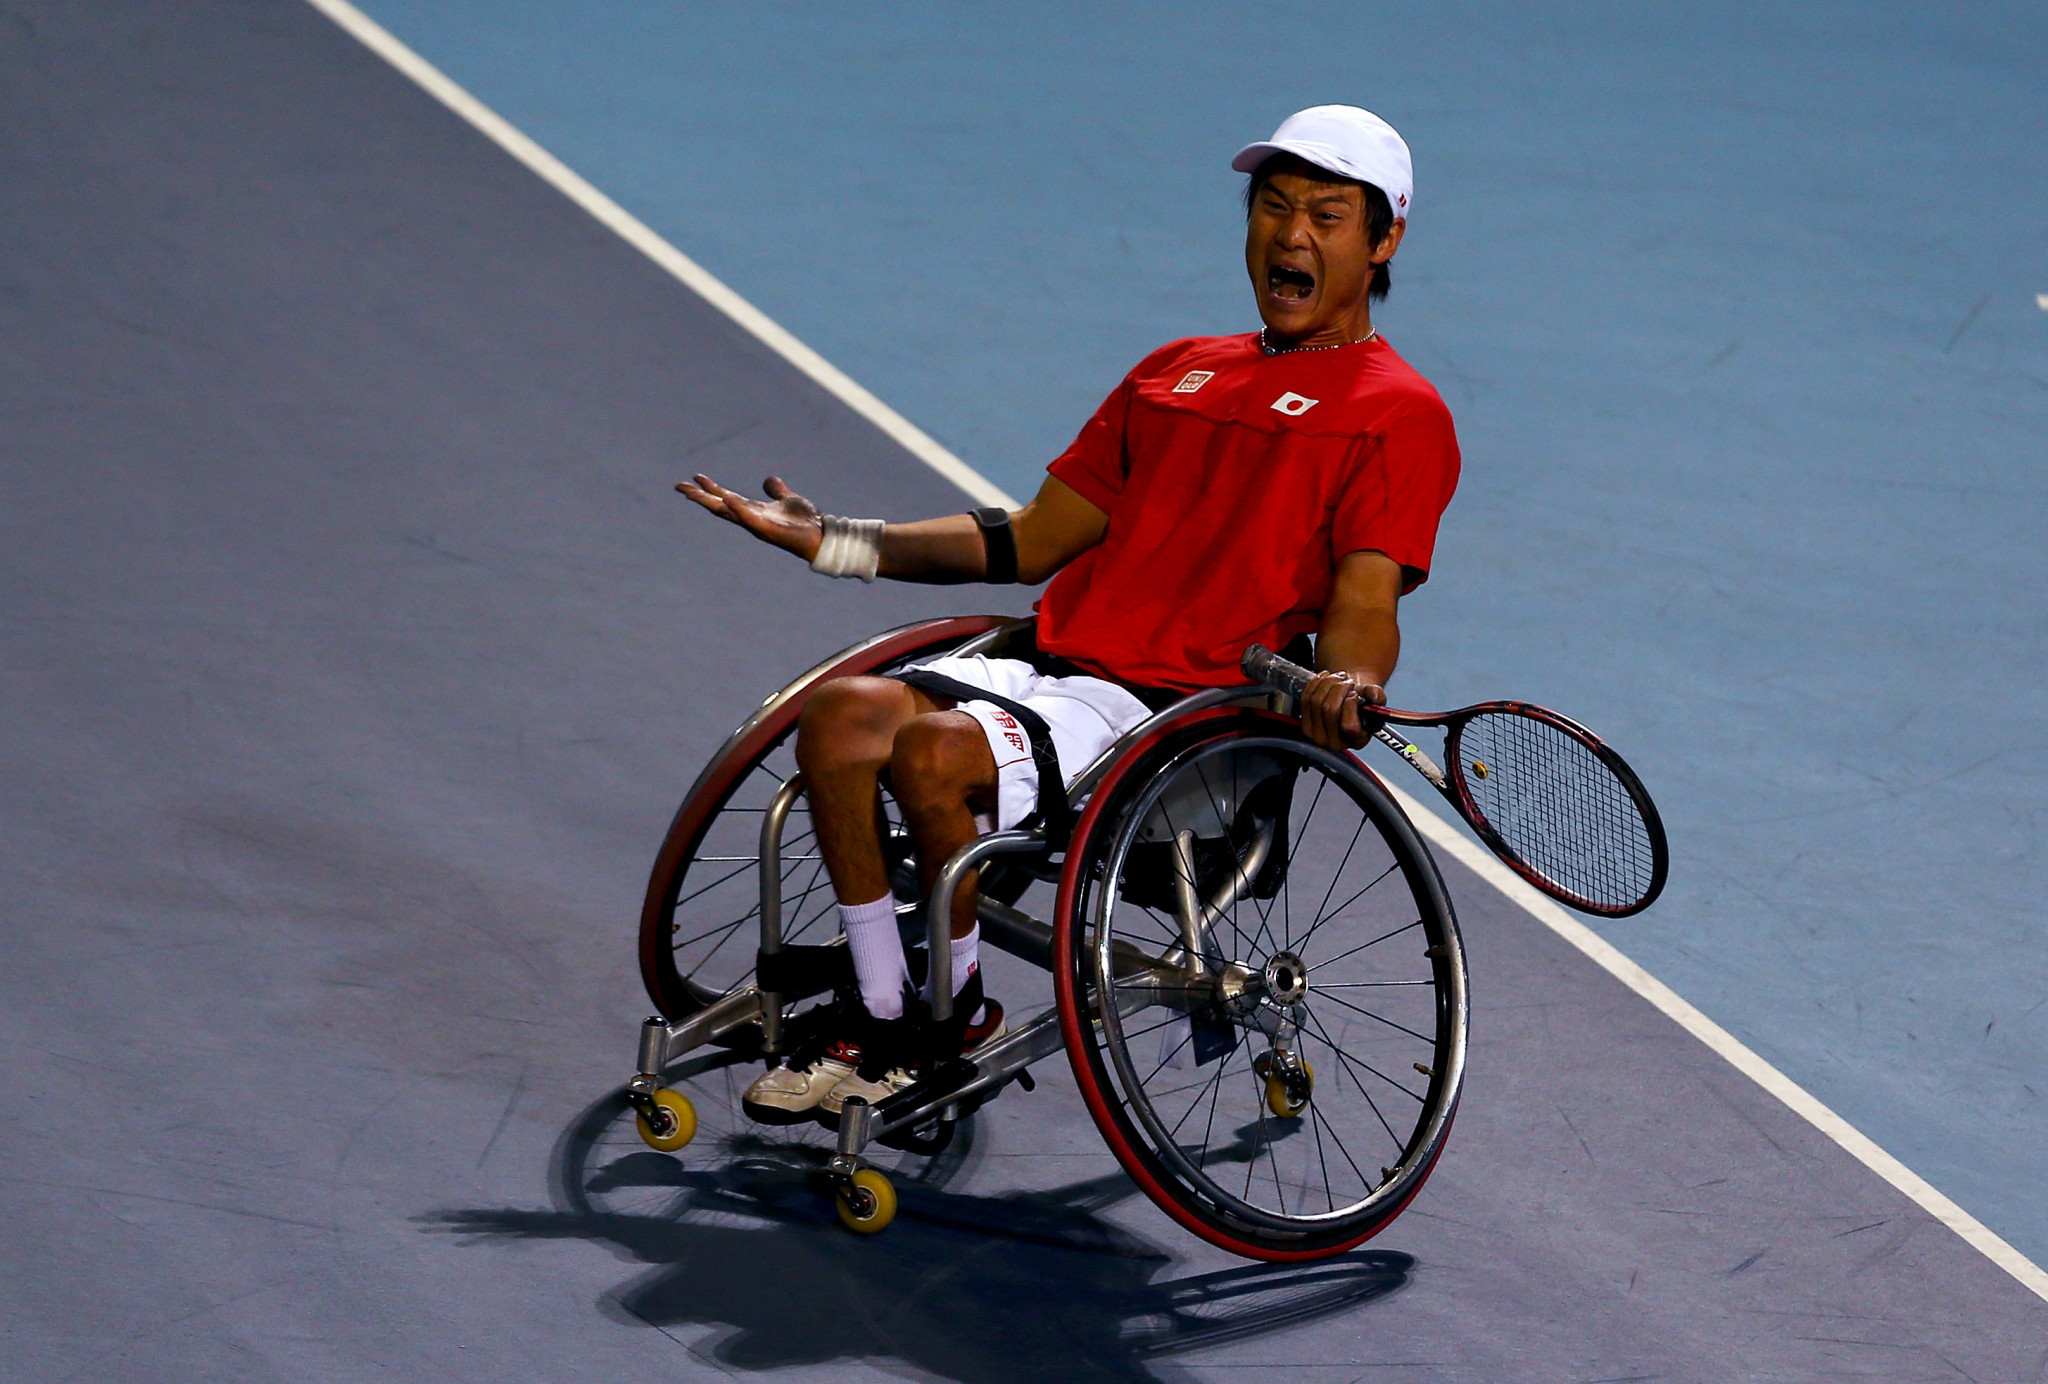 Shingo Kunieda won the second of his two Paralympic men's singles titles at London 2012 ©Getty Images